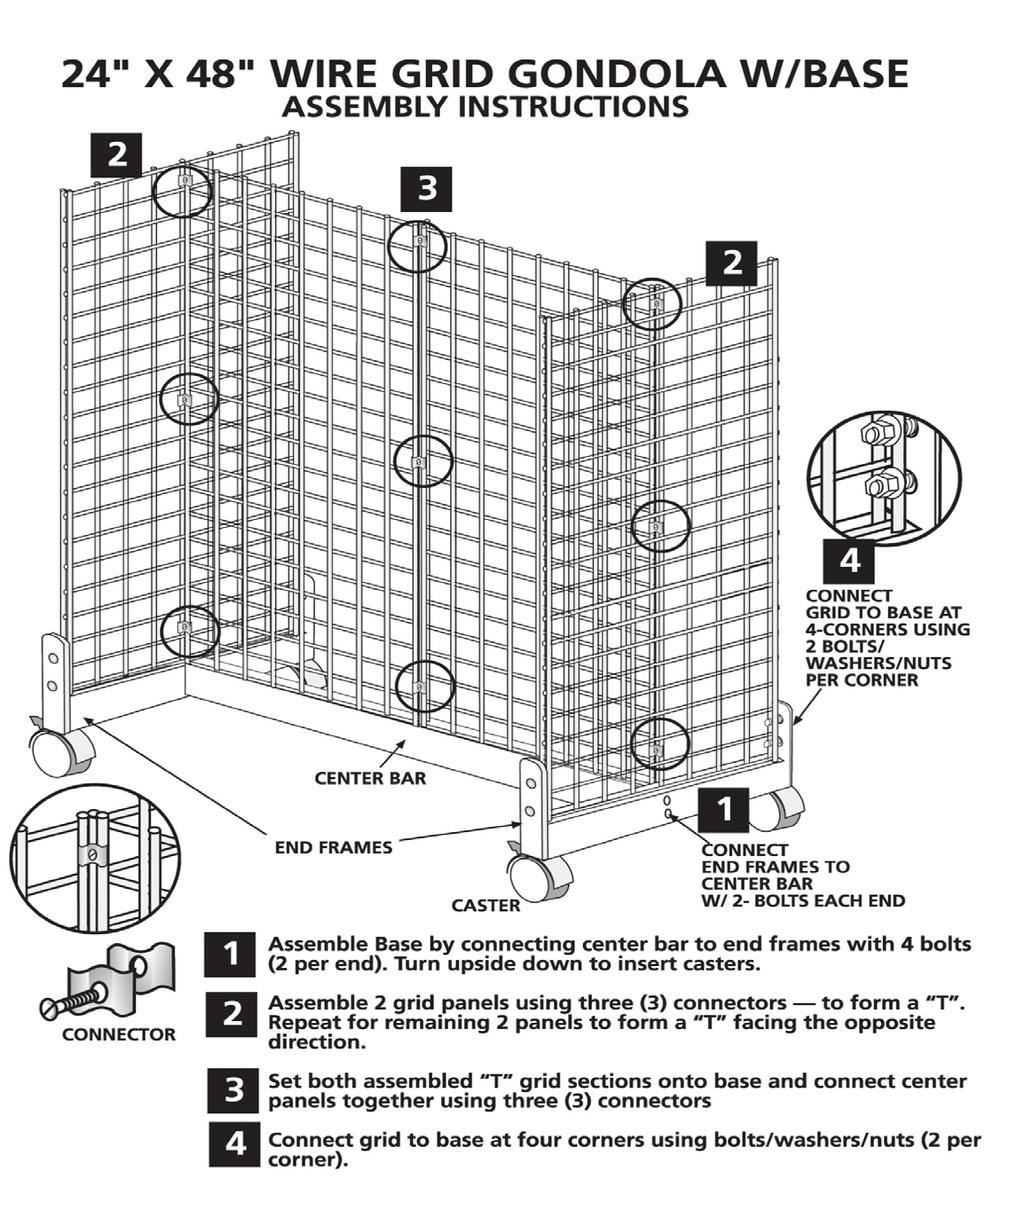 Grid Display Assembly Instructions and Planogram